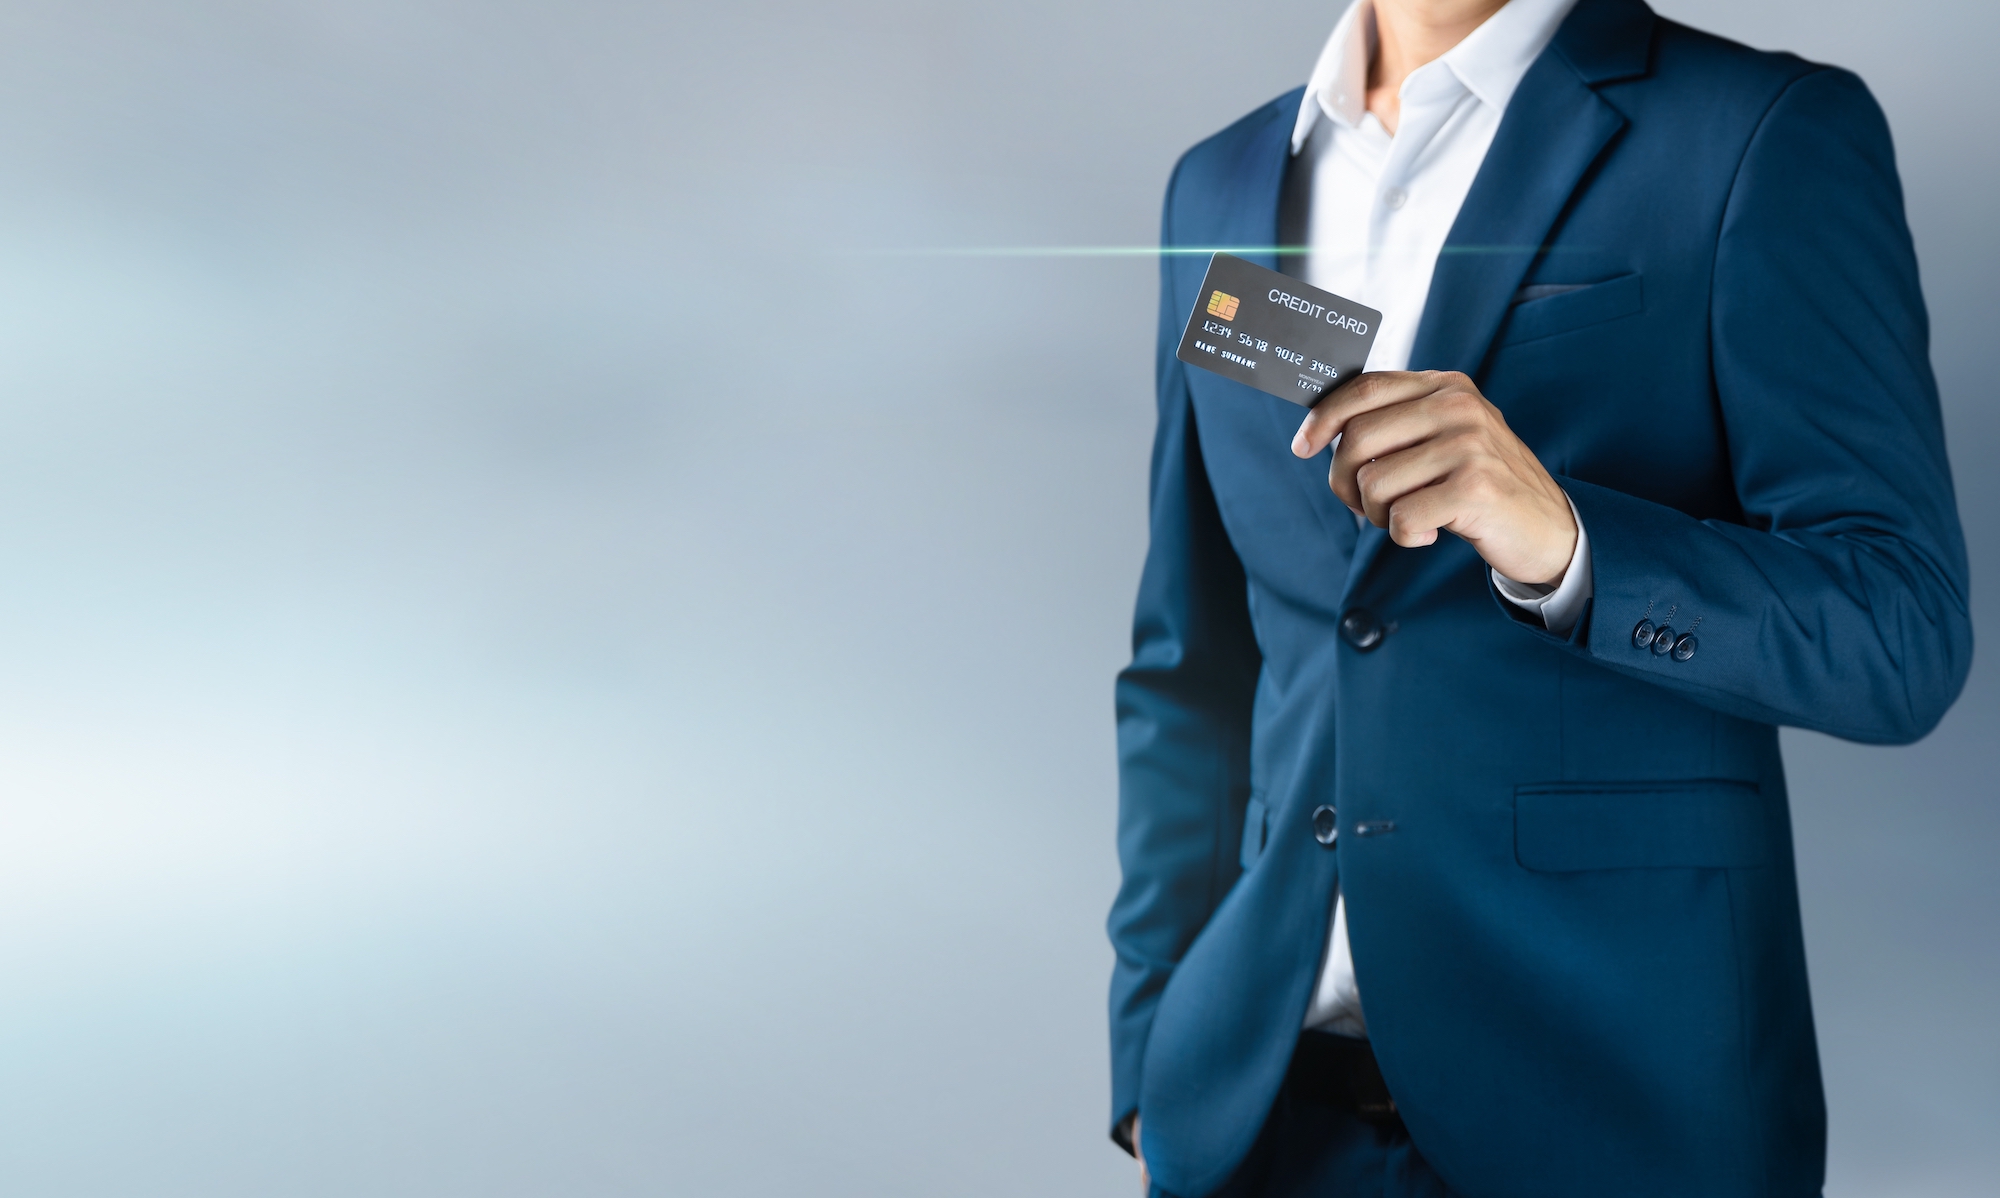 An image of a man in a suite holding a credit card is shown.